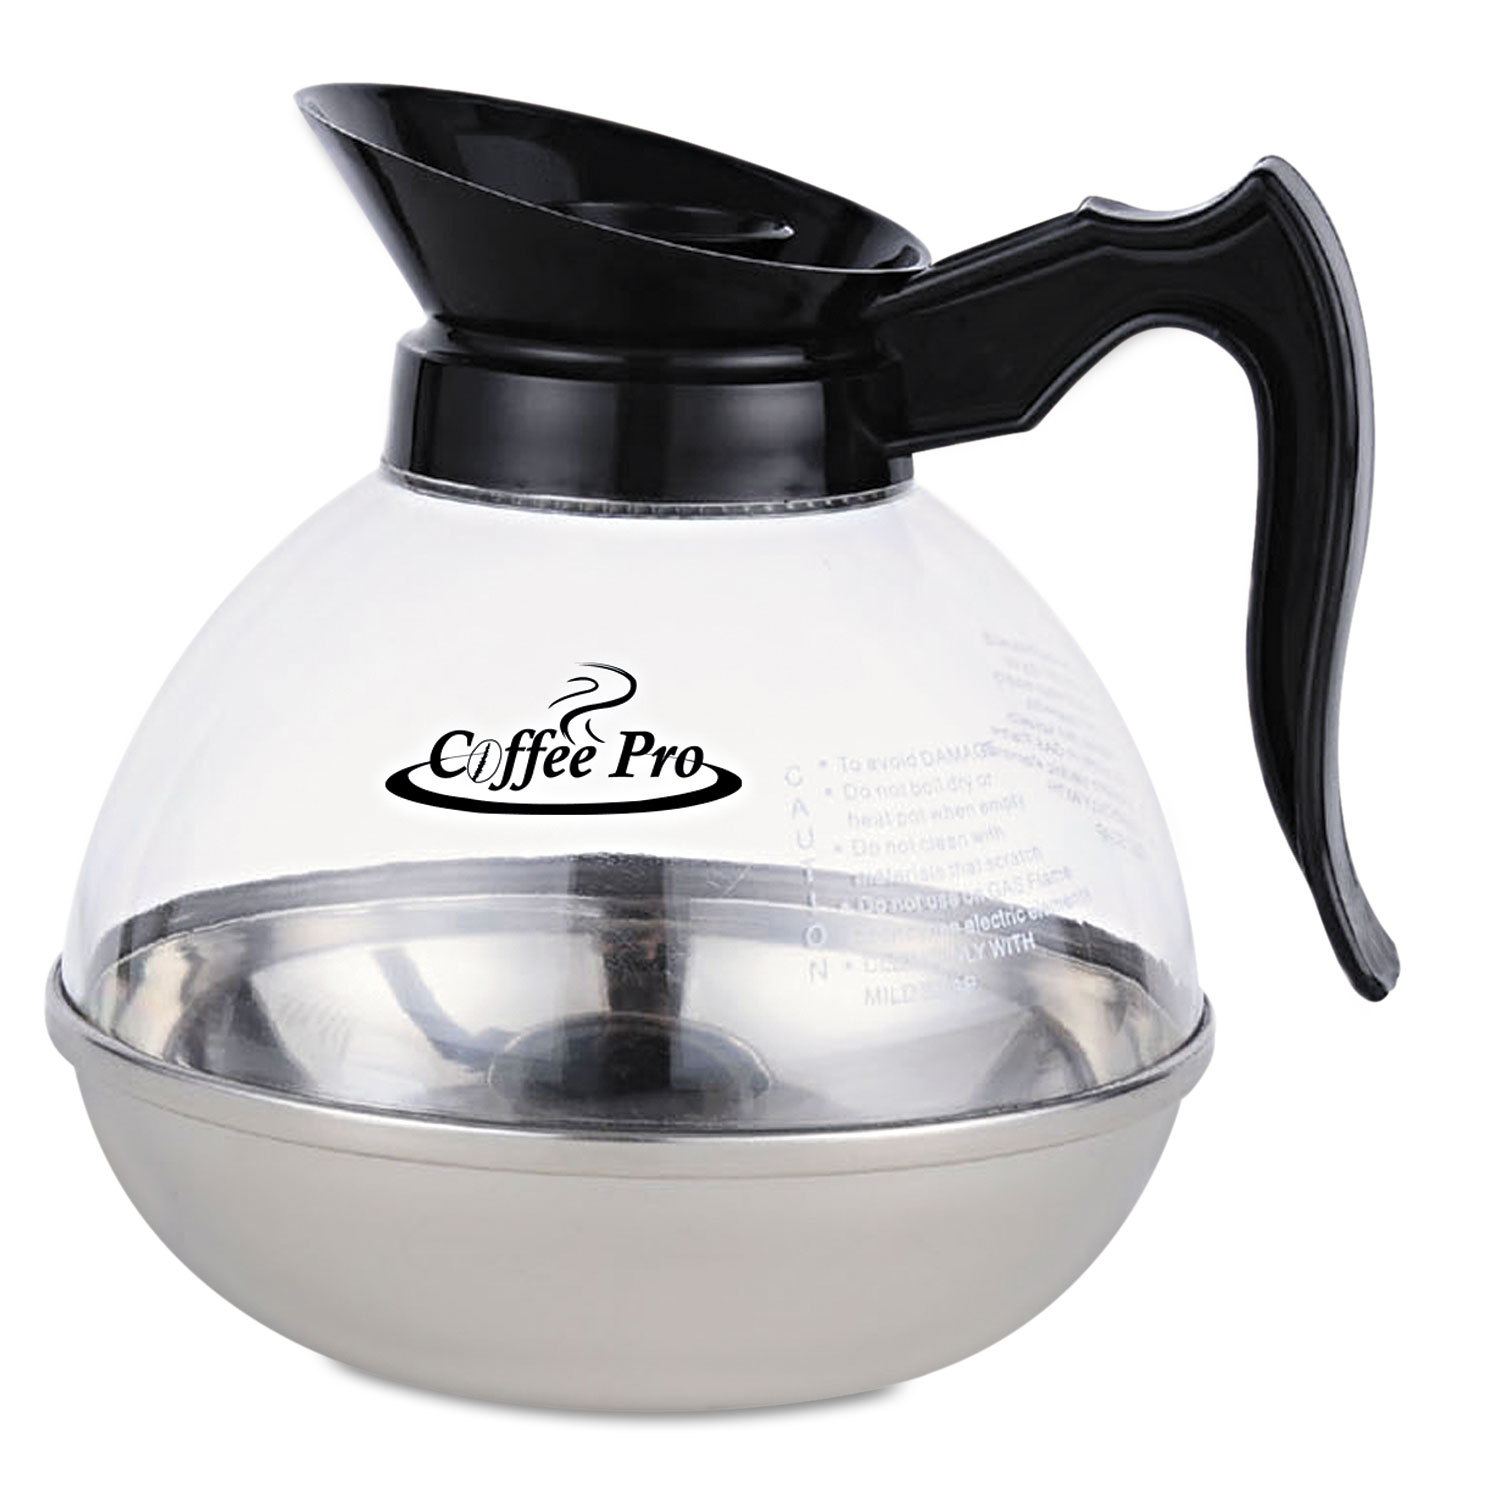  Coffee Pro CPU12 Unbreakable Regular Coffee Decanter, 12-Cup, Stainless Steel/Polycarbonate (OGFCPU12) 